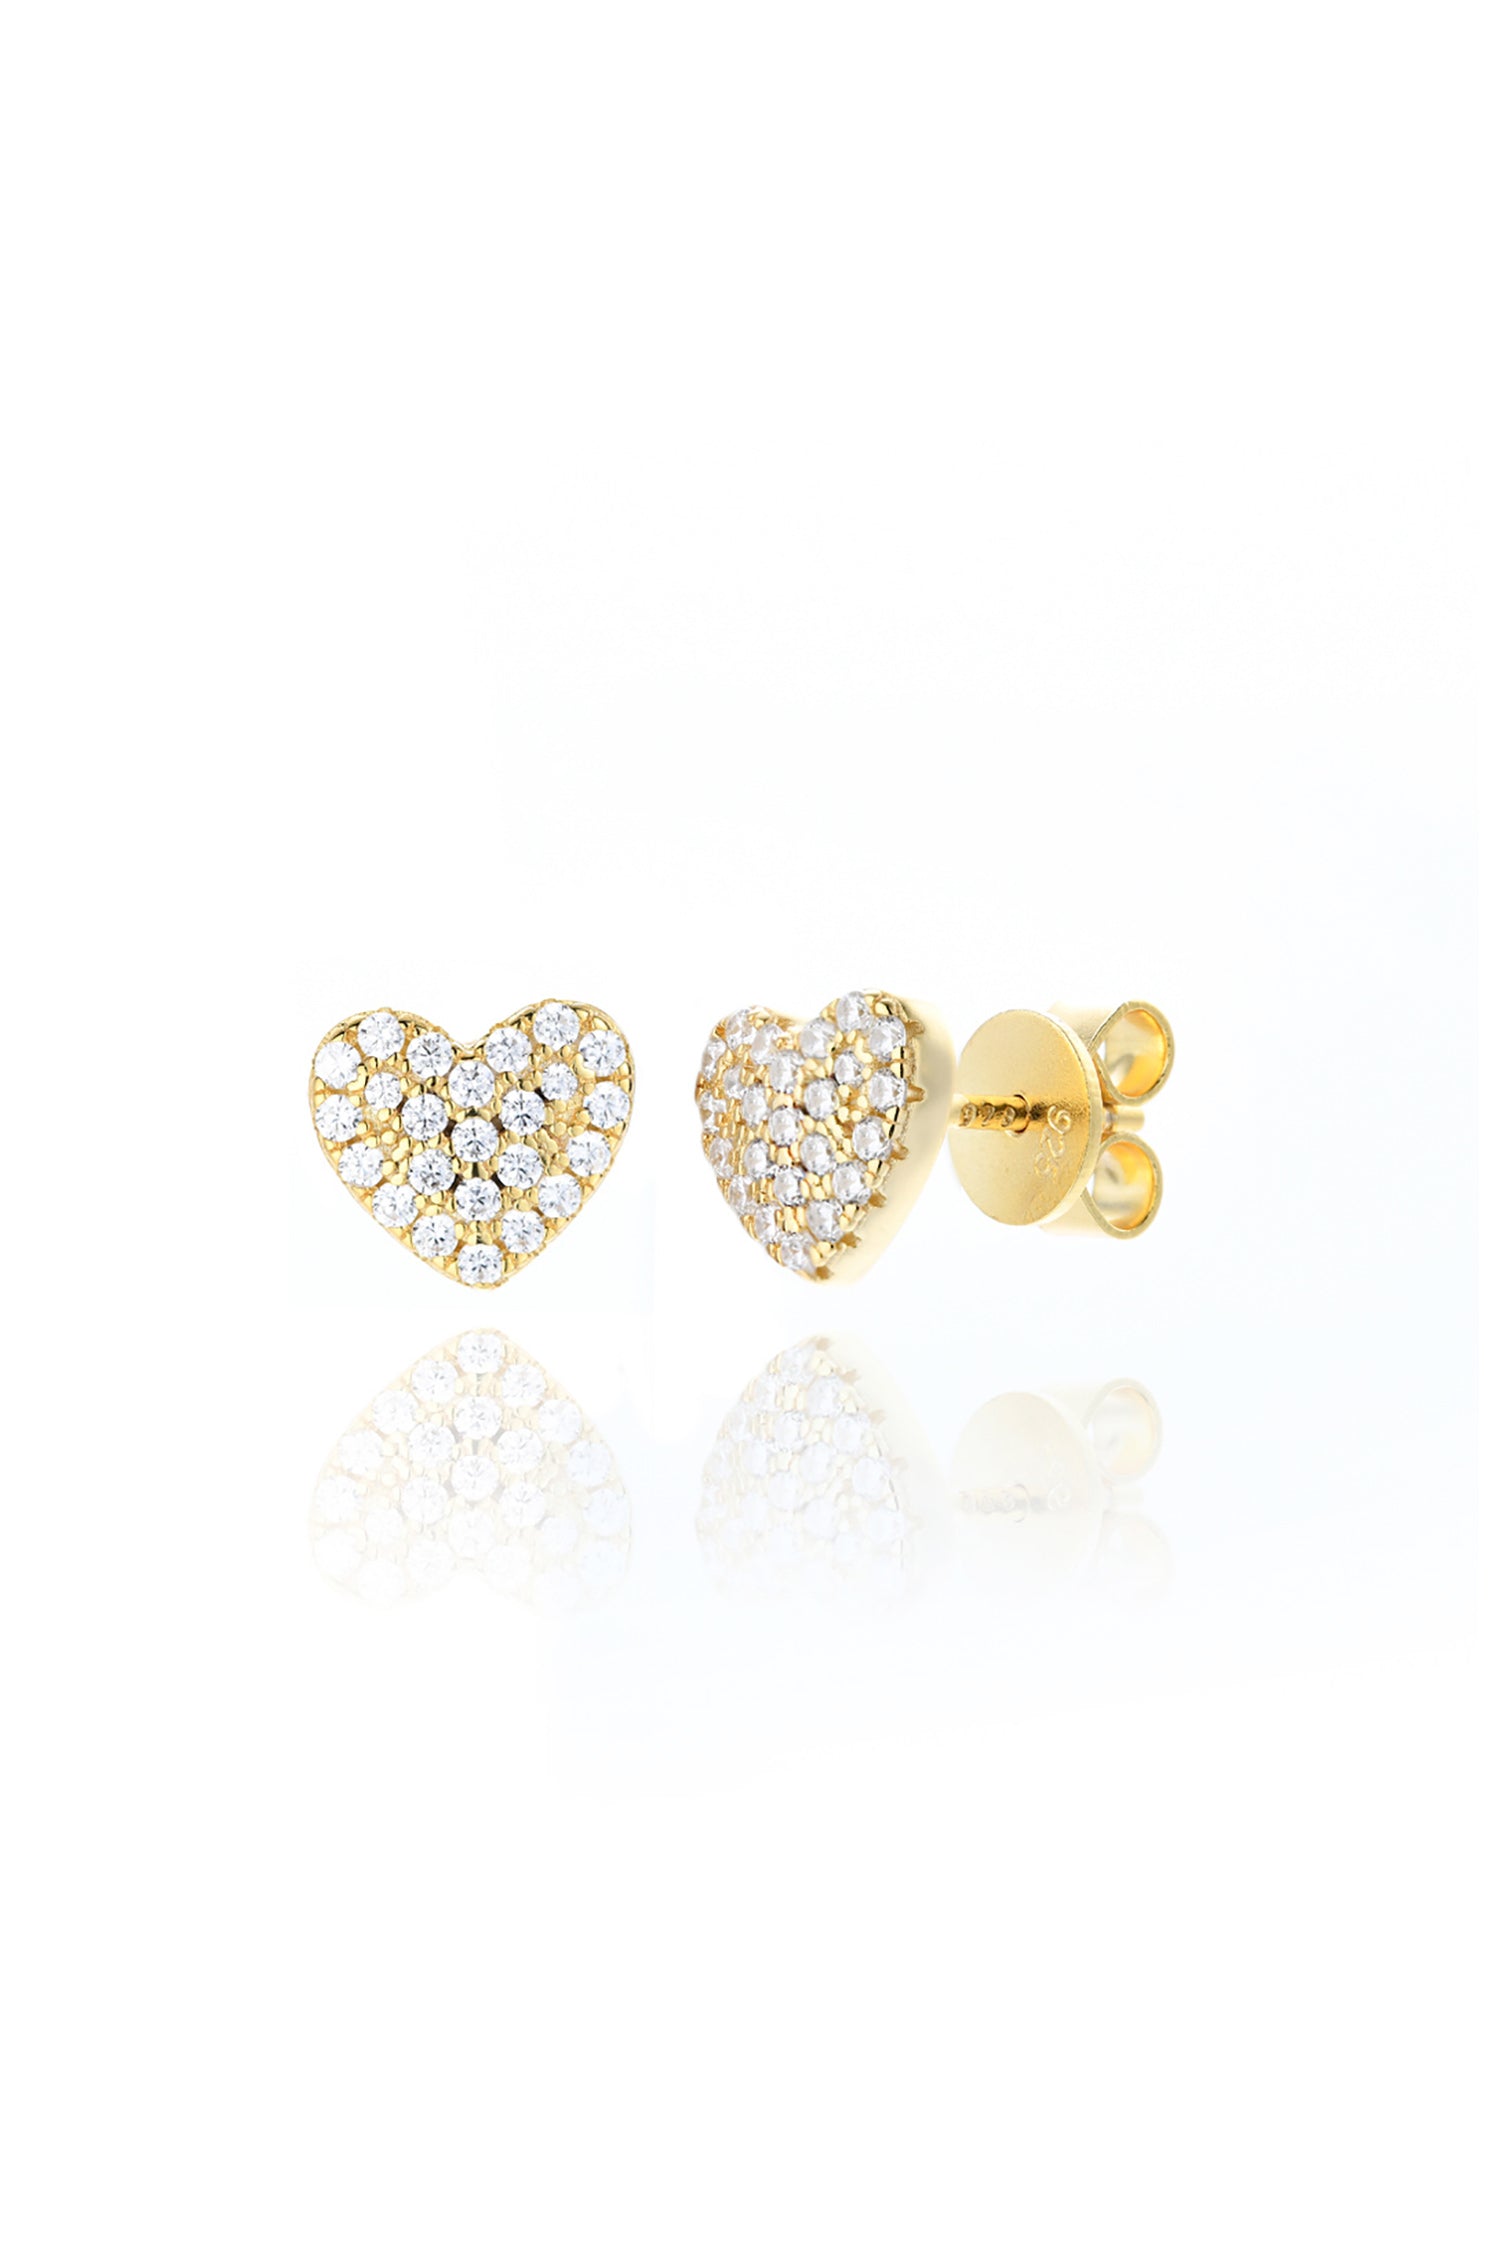  Pave Heart Stud Earrings 14k Gold Plated Sterling Silver White Background